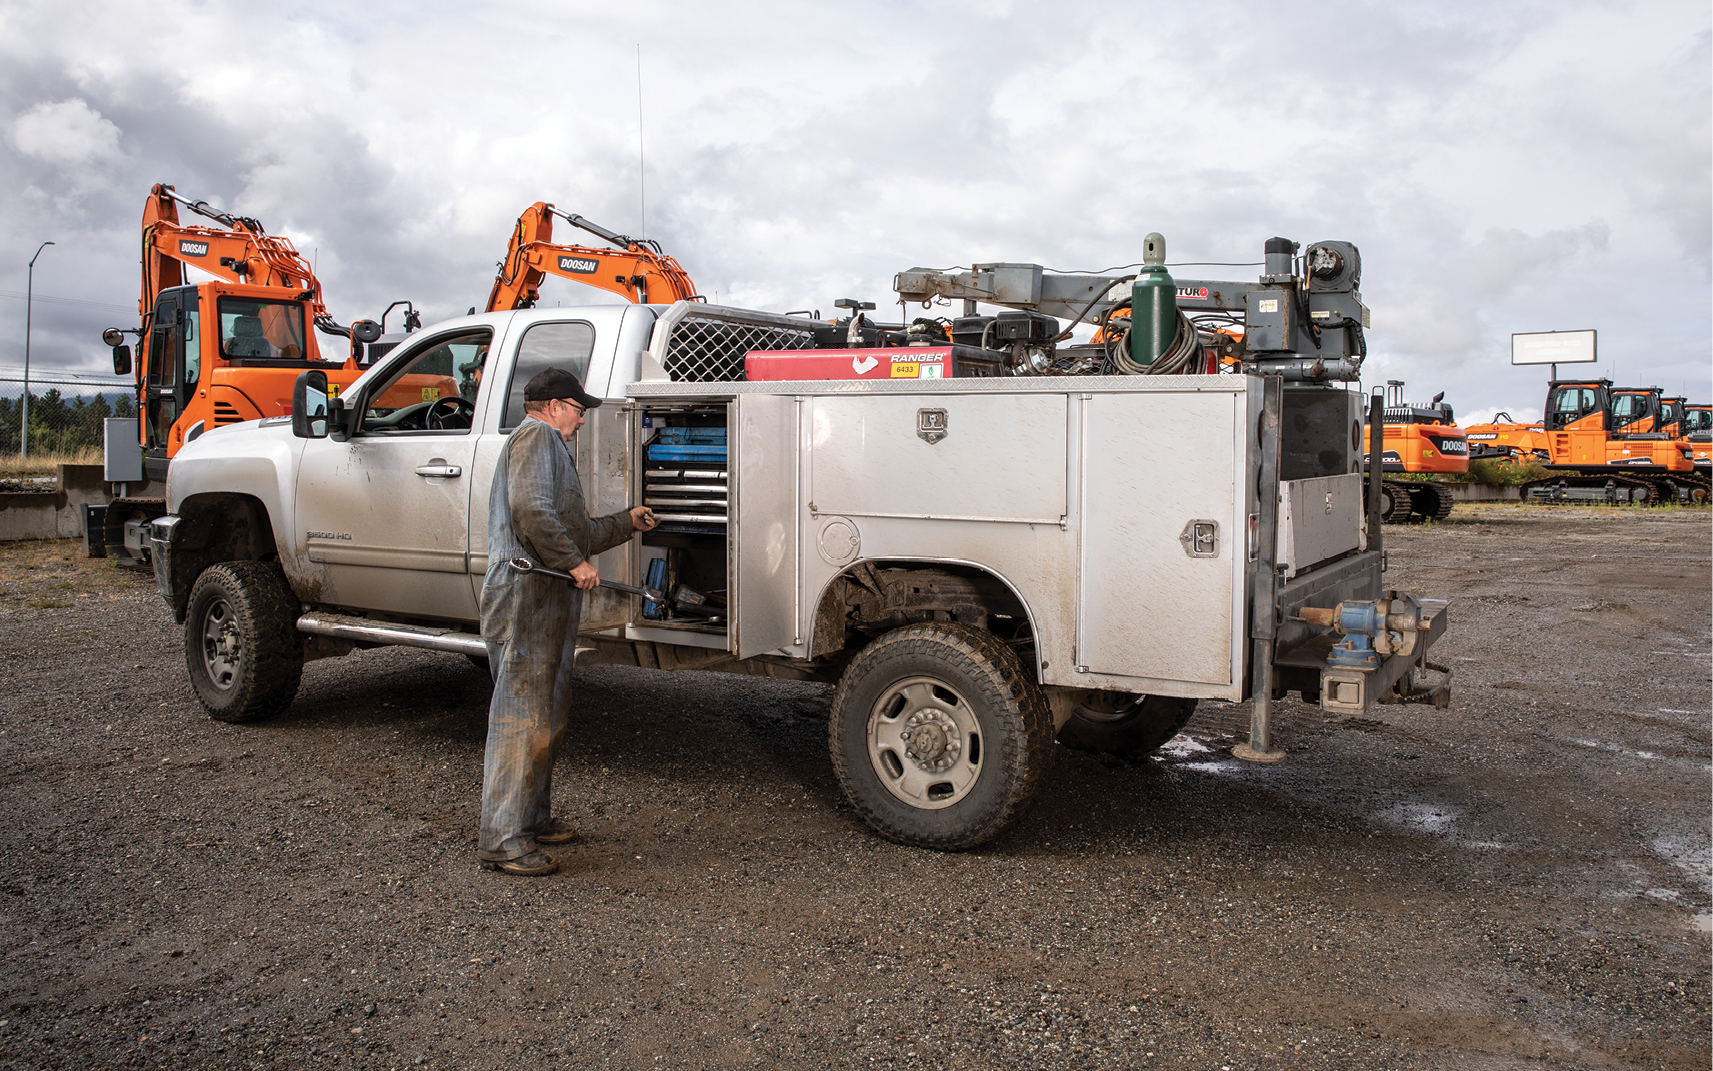 A heavy equipment service technician retrieves tools from his field service truck and performs maintenance at a jobsite.